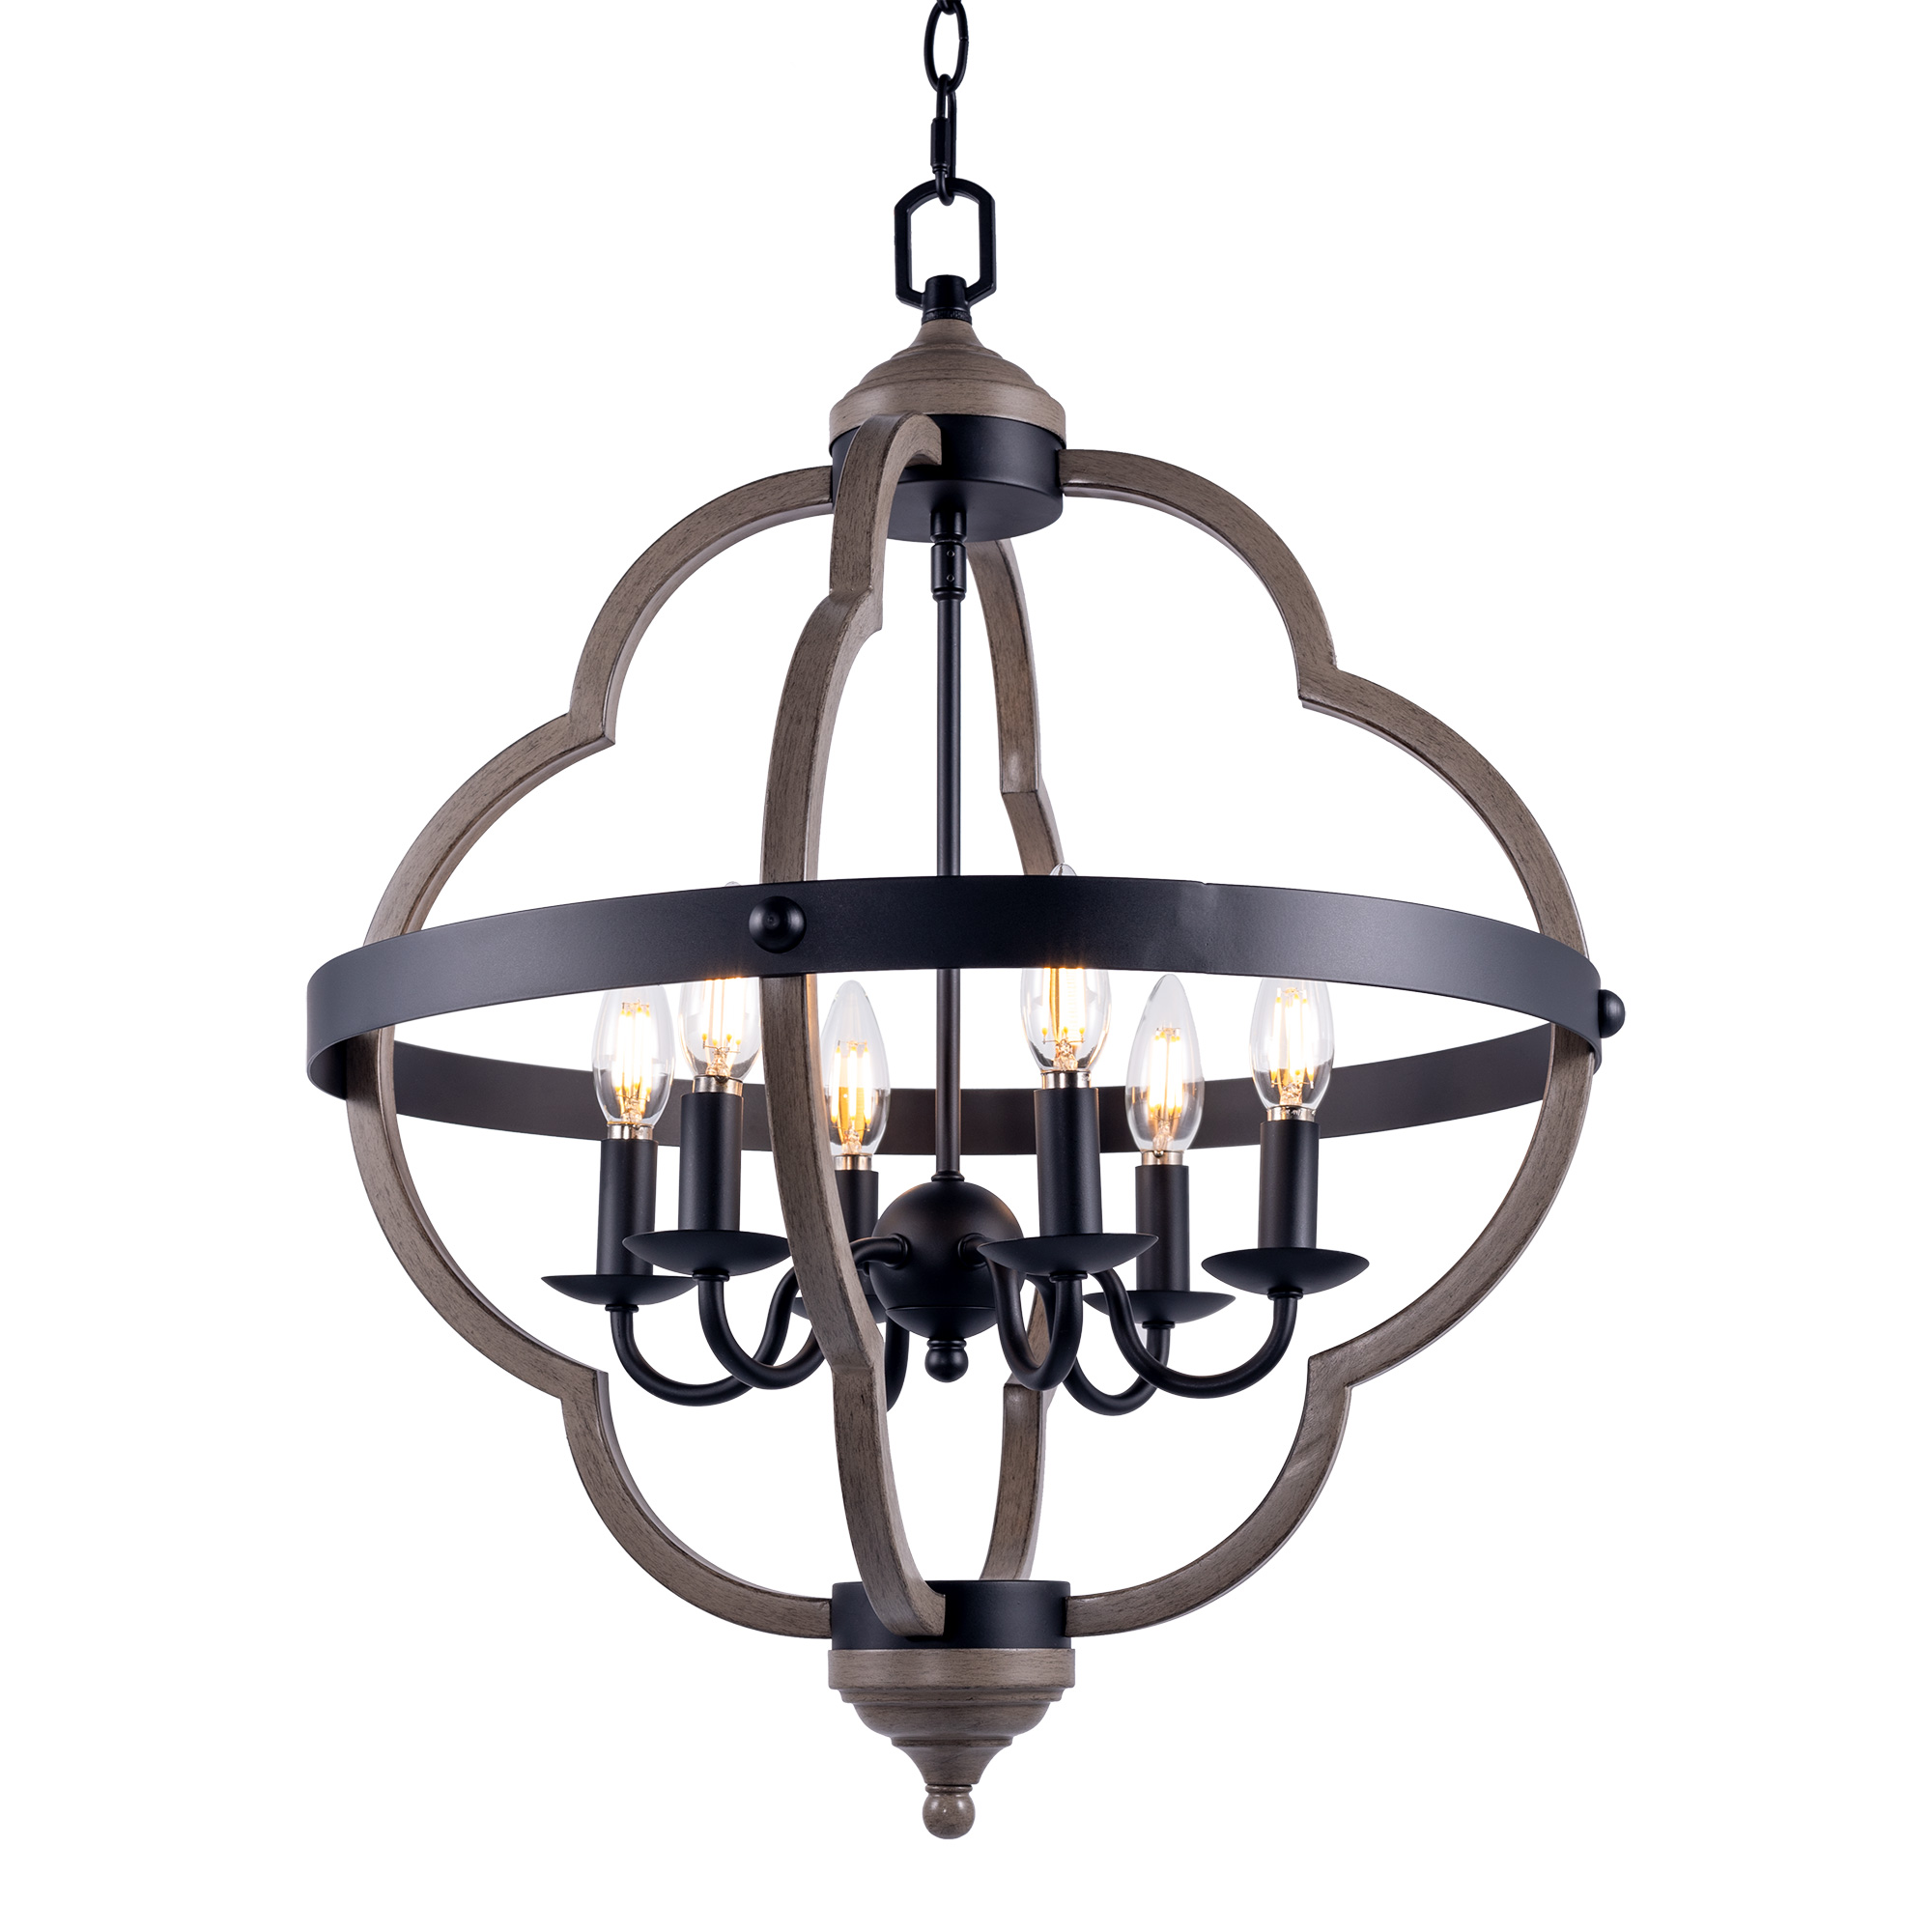 USA-Direct-6-Light-Candle-Style-Geometric-Chandelier-Industrial-Rustic-Indoor-Pendant-Light-Without--1877127-6